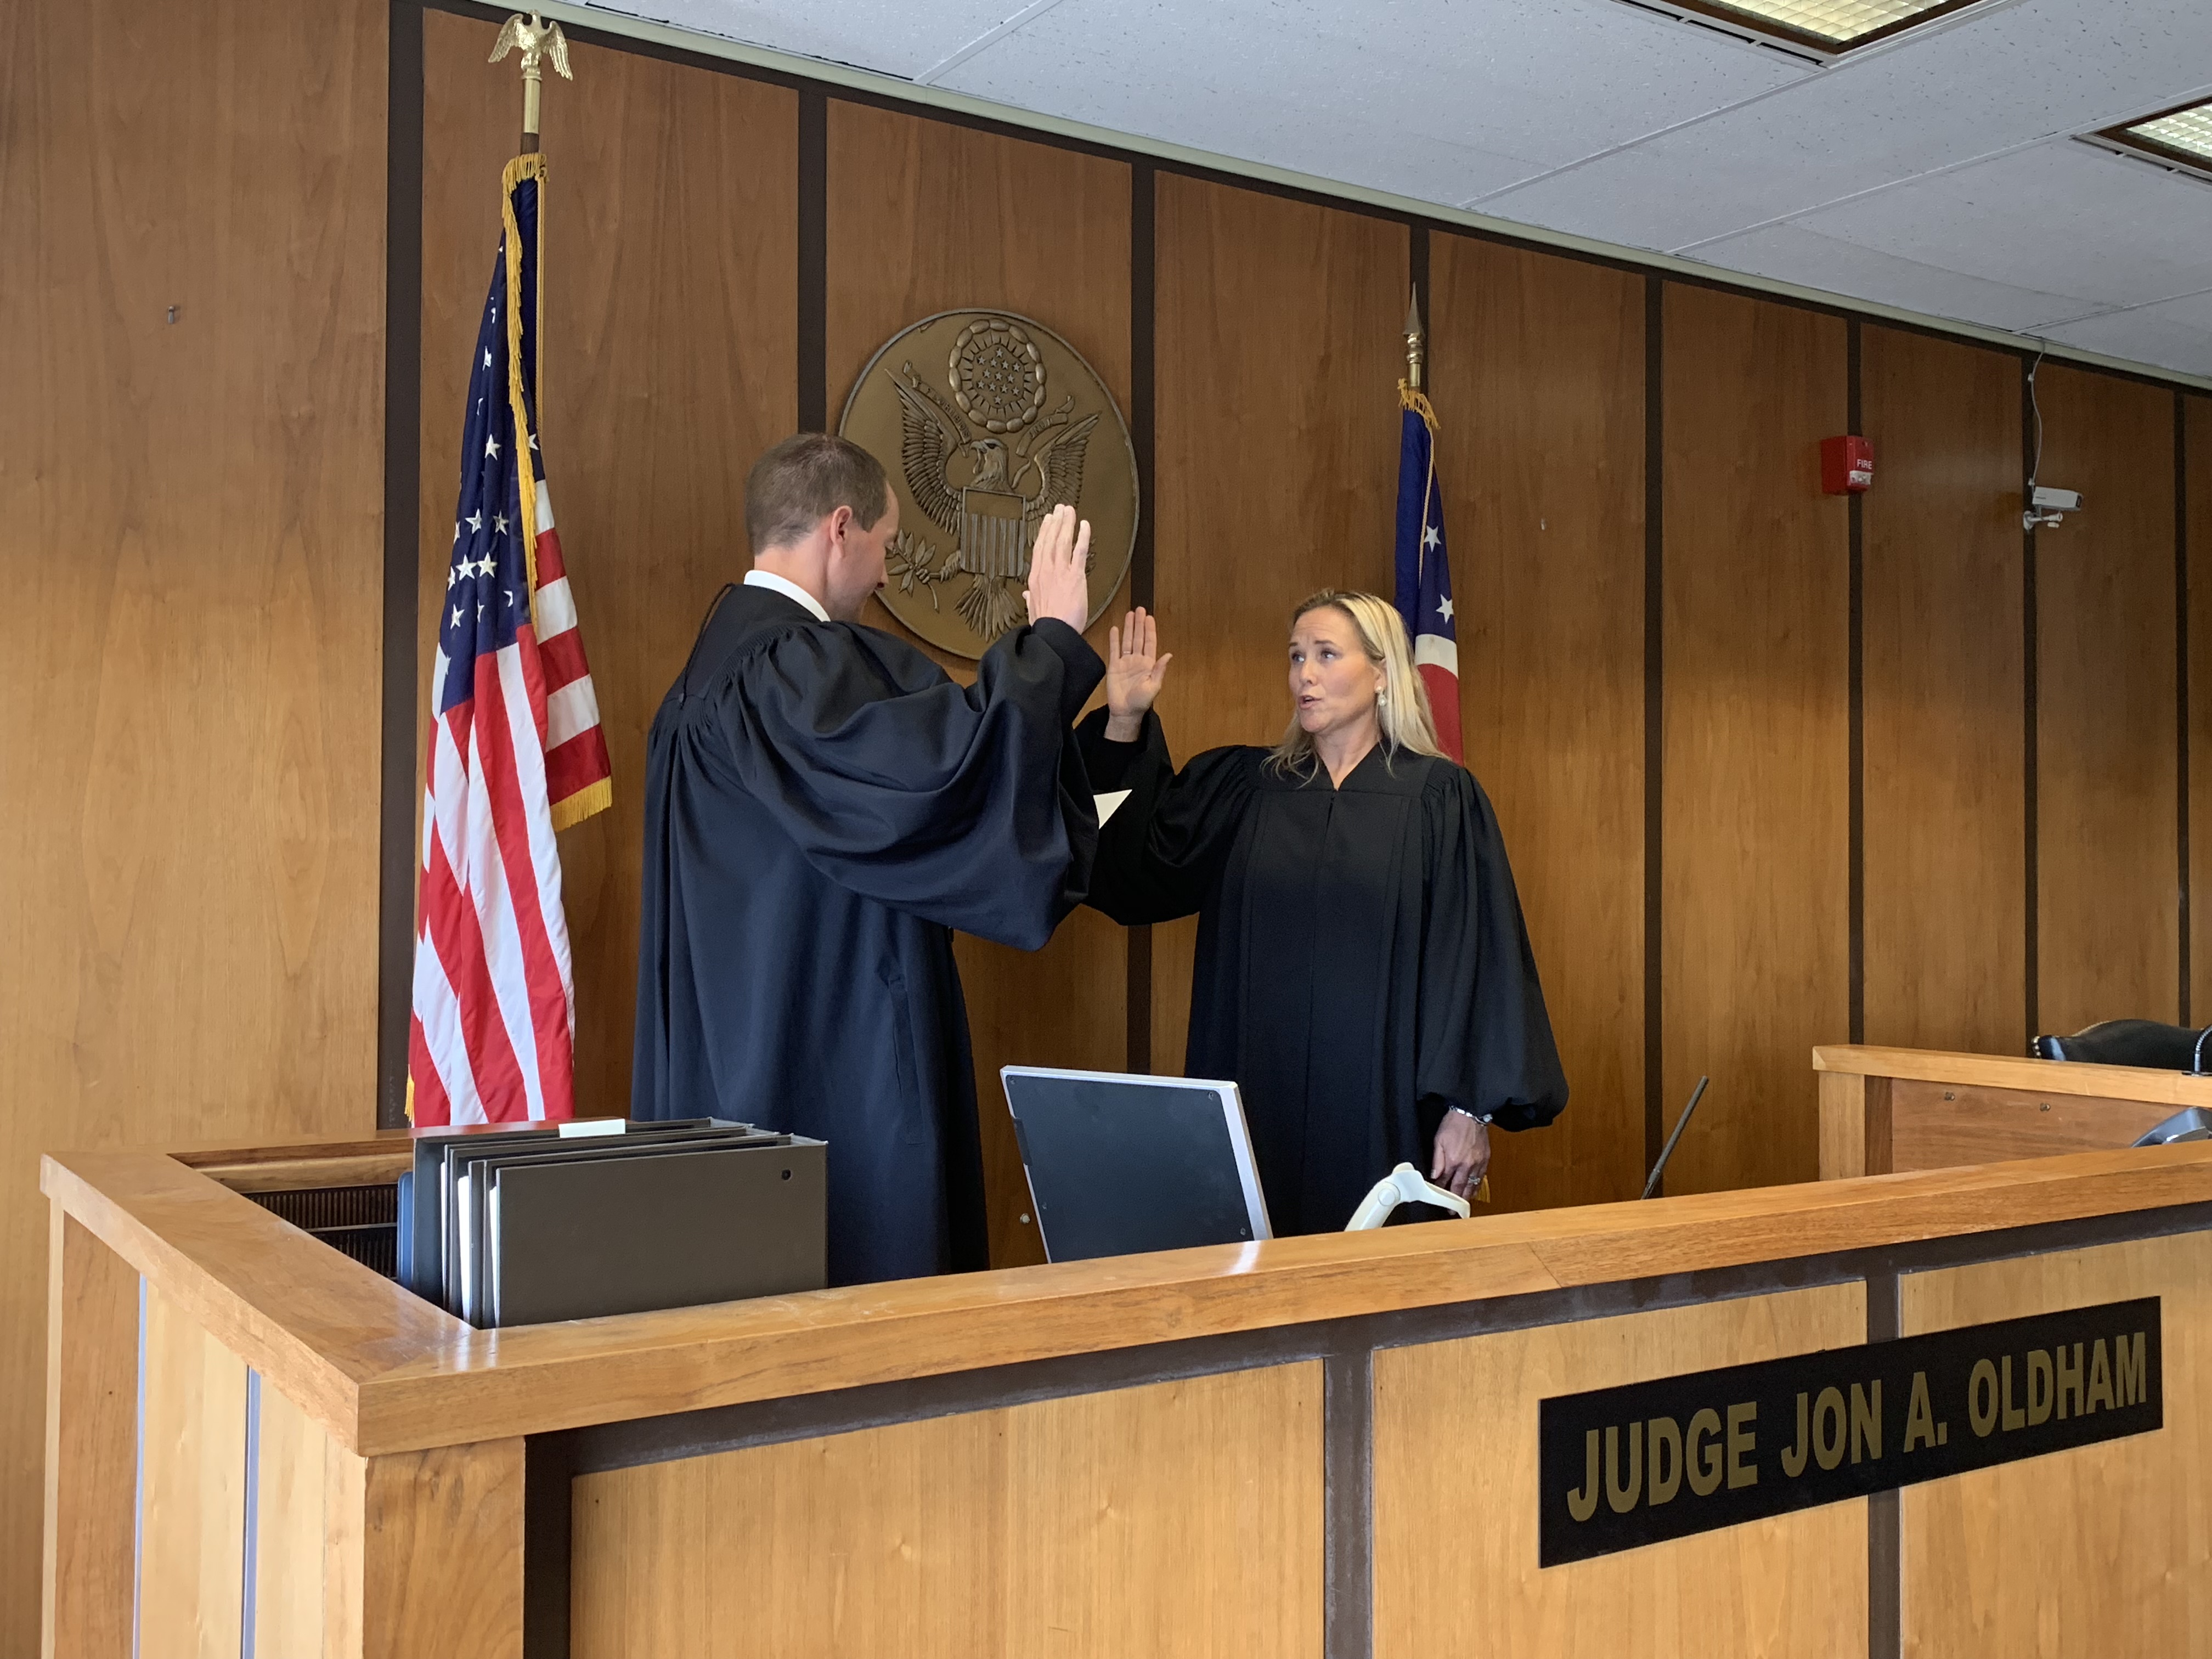 Akron Municipal Court Administrative/Presiding Judge Jon Oldham administers the oath for Visiting Magistrate Jennifer D. Towell